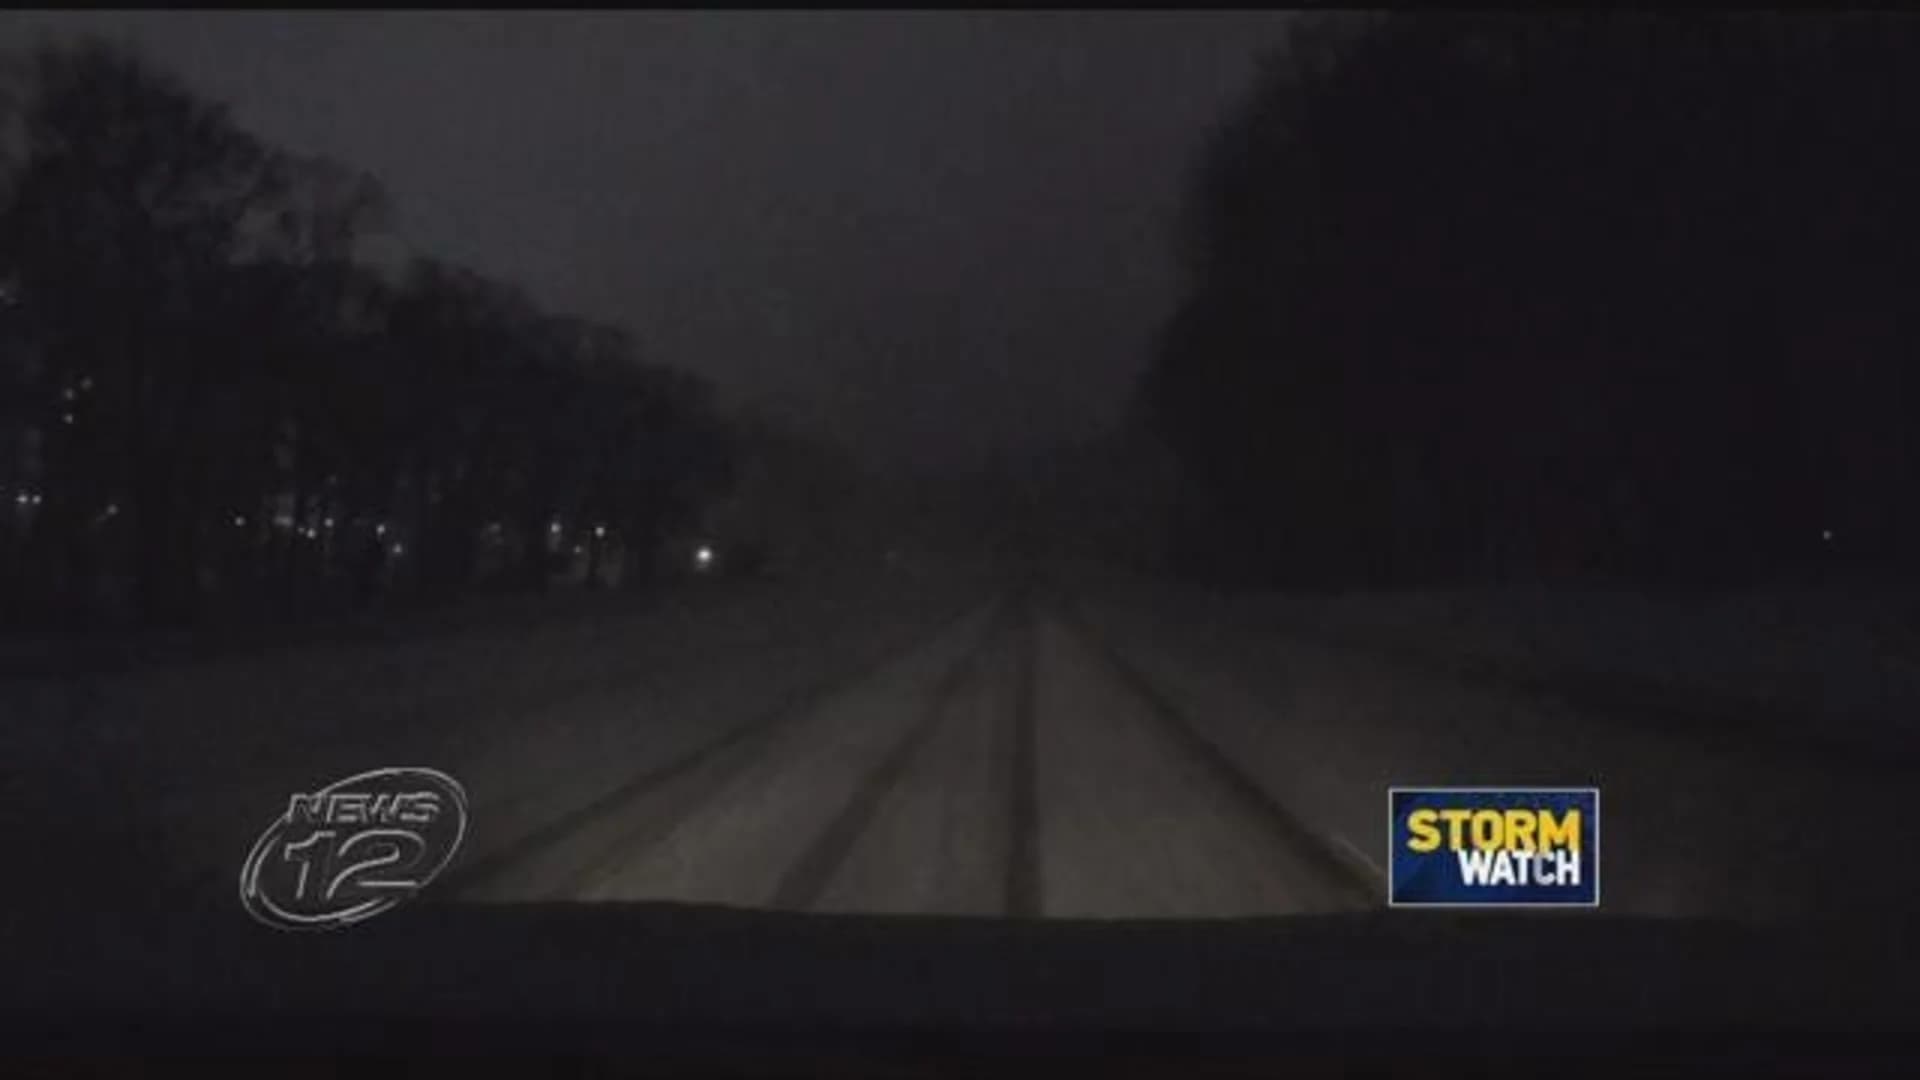 Mobile 12 monitors road conditions in 4th March nor'easter